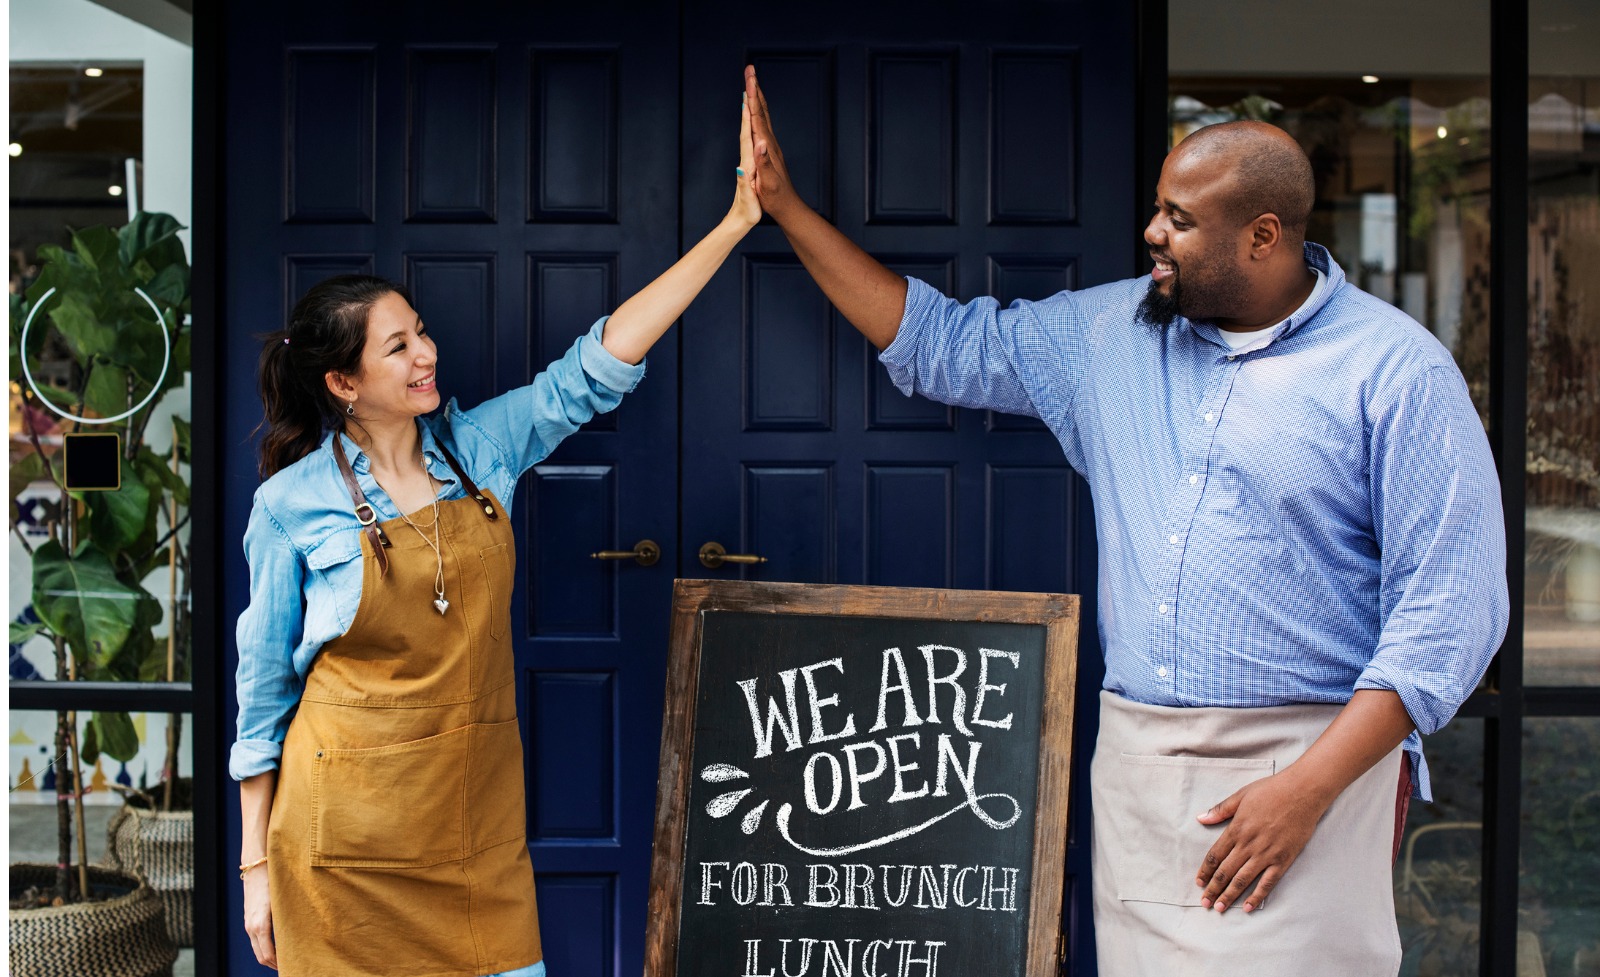 Two people high five after opening business.